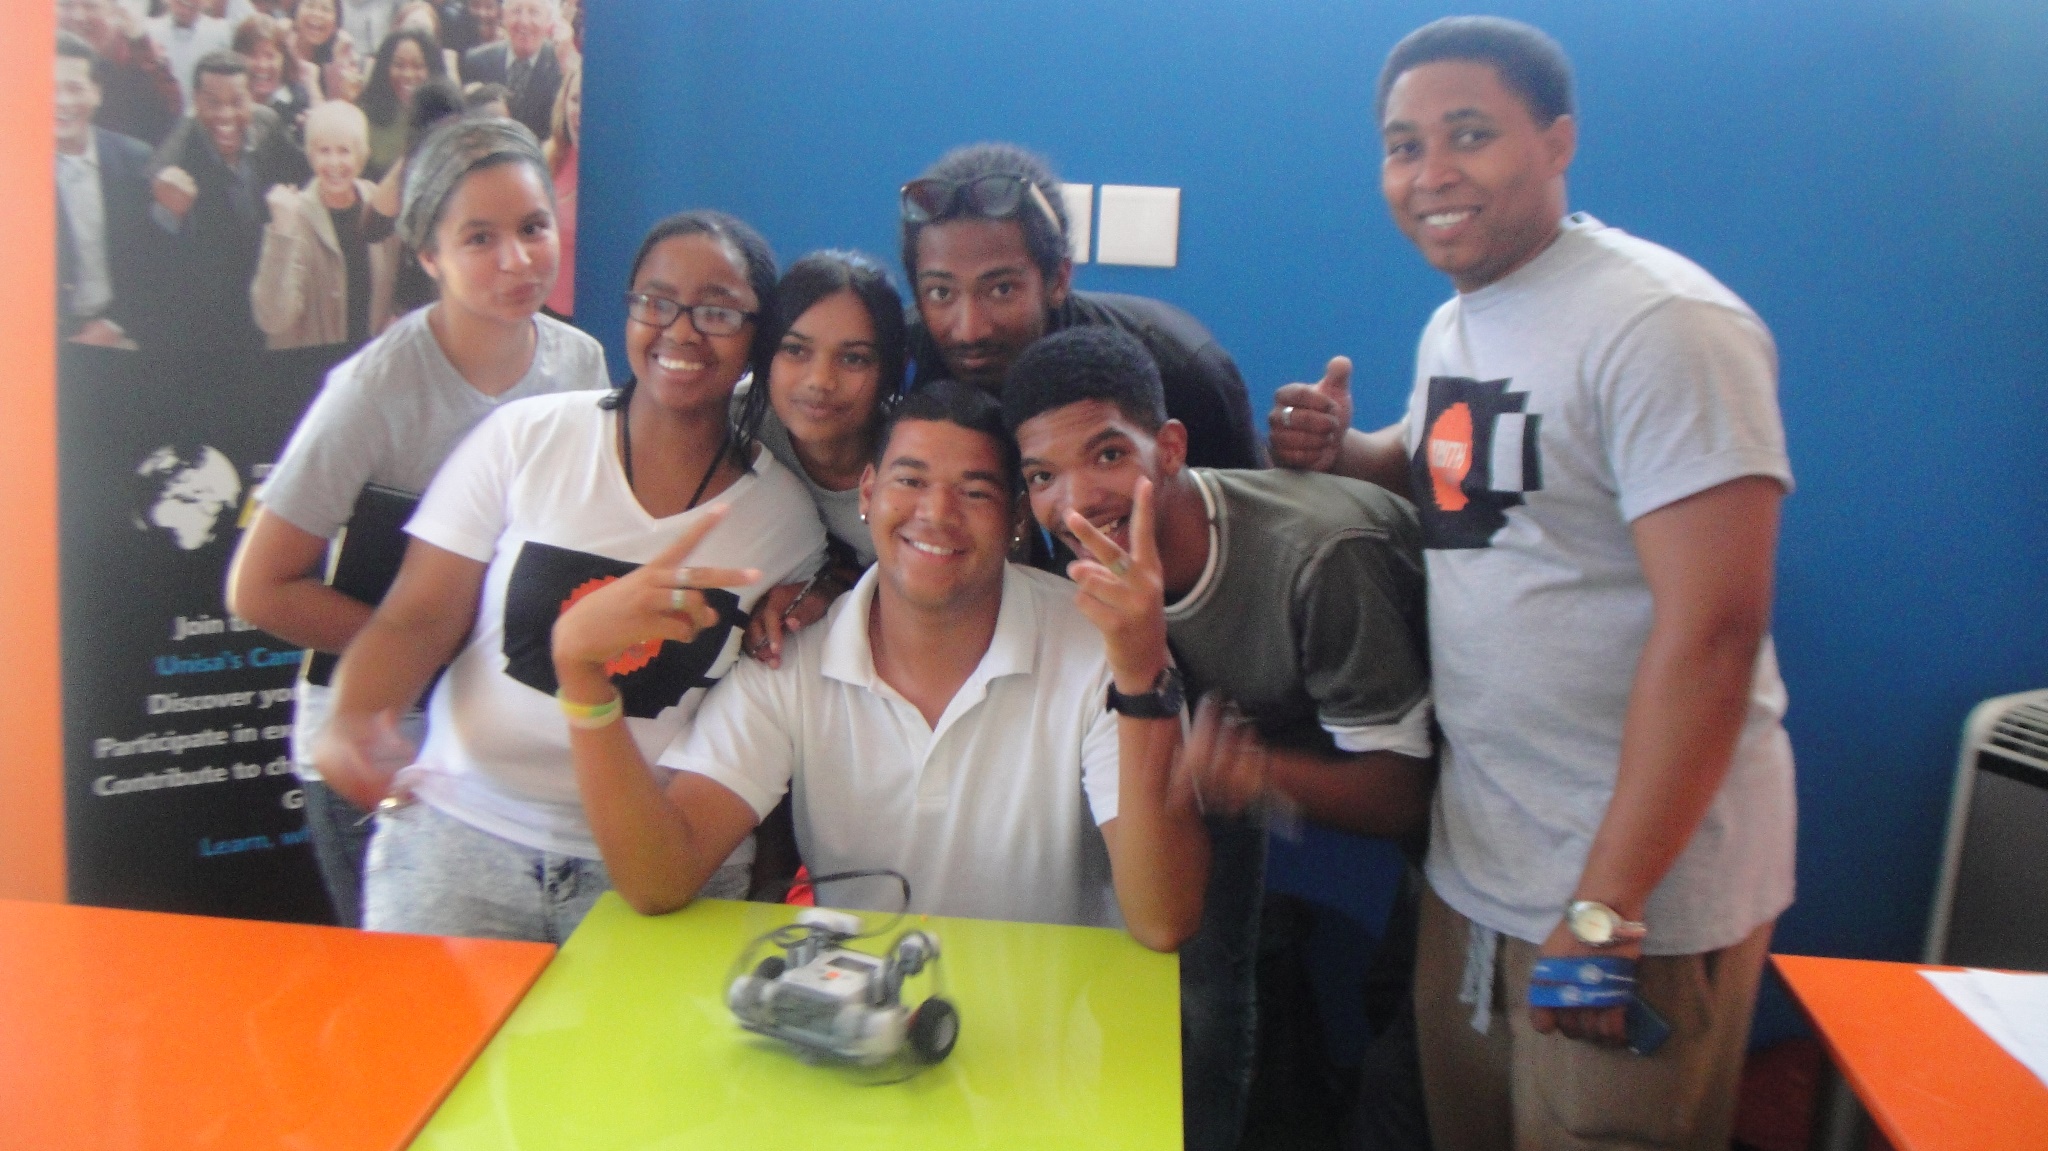 Group photo of the winning team in the Robotics workshop